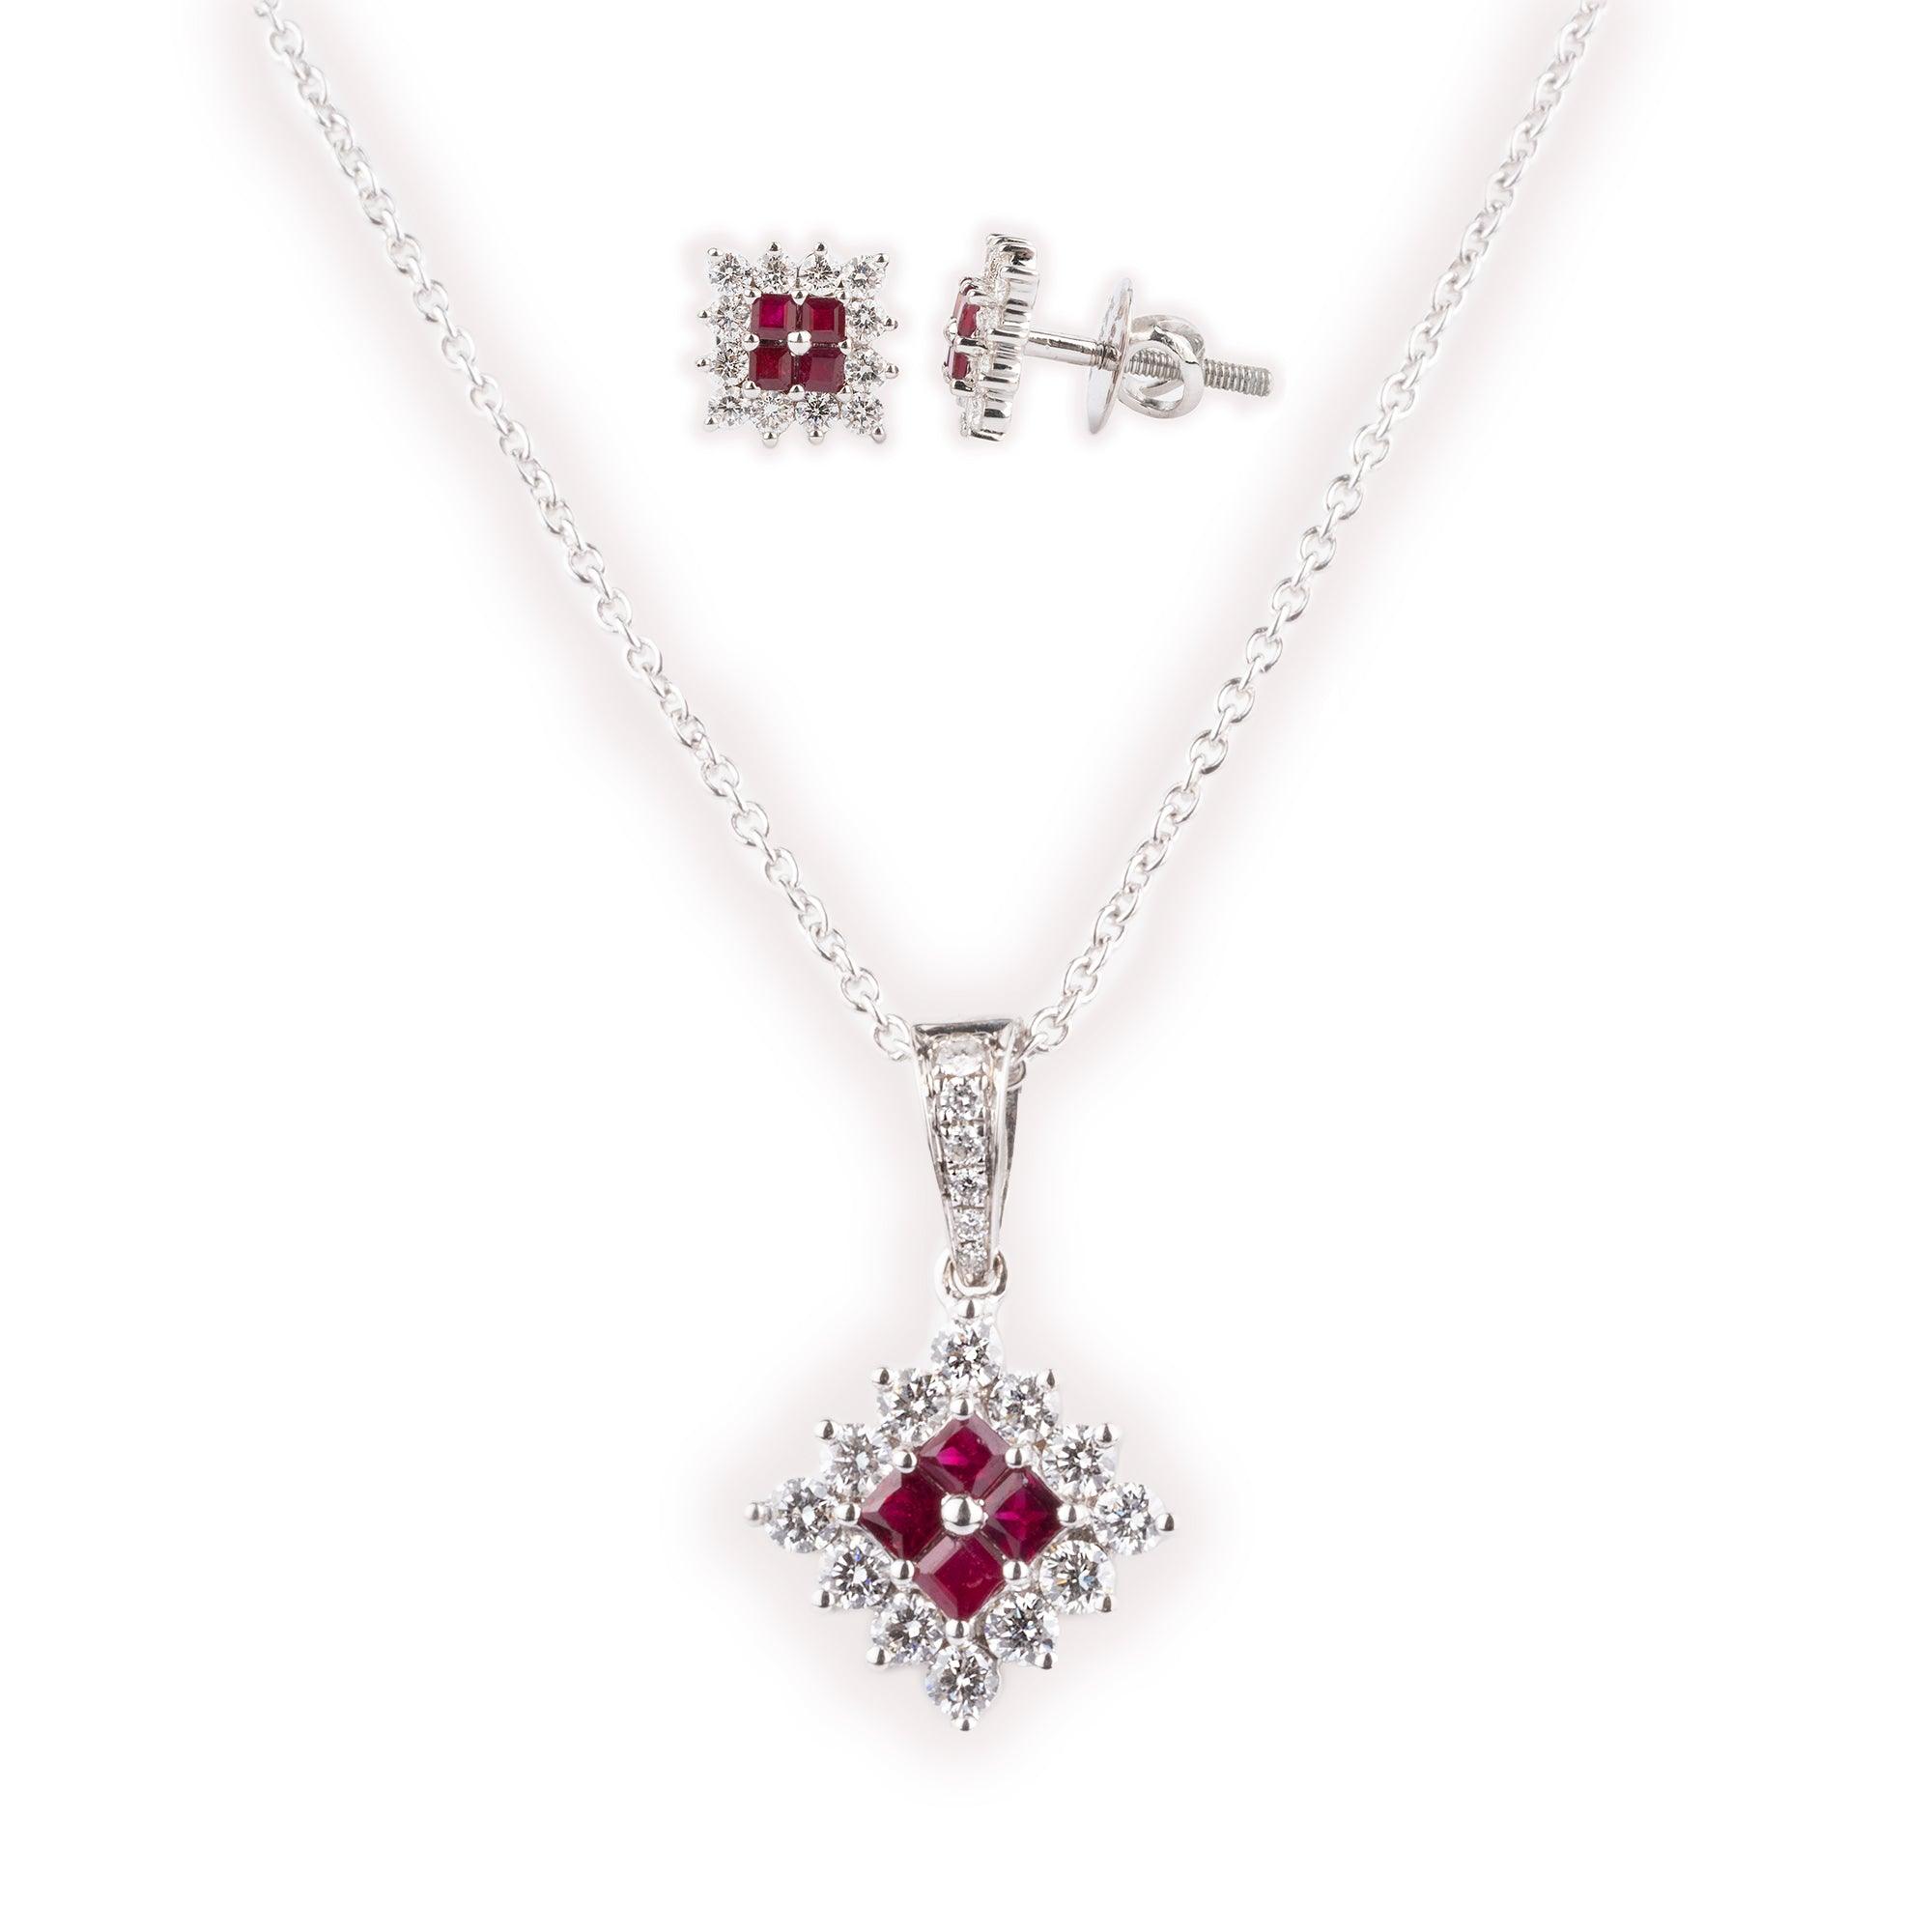 18ct White Gold Diamond & Ruby Chain, Pendant and Earrings Set CH11807-16 MCS2597 MCS2598